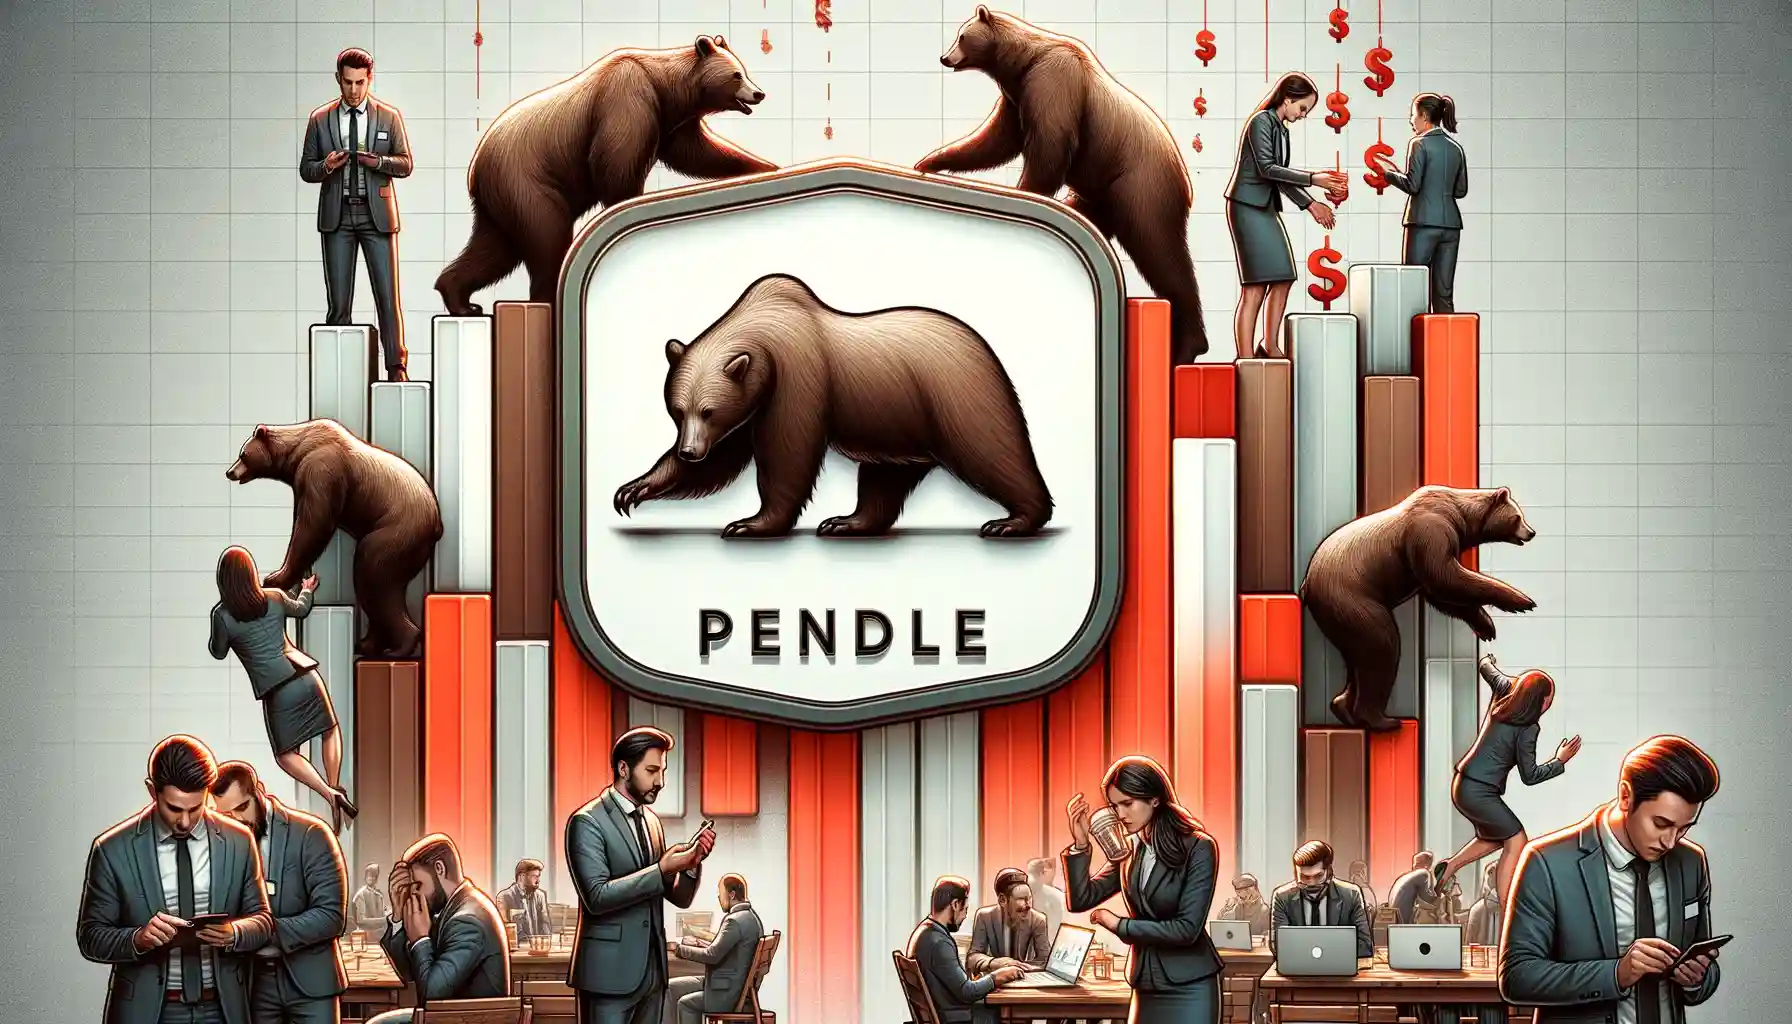 100% of PENDLE investors in profit: This could be a red flag as…